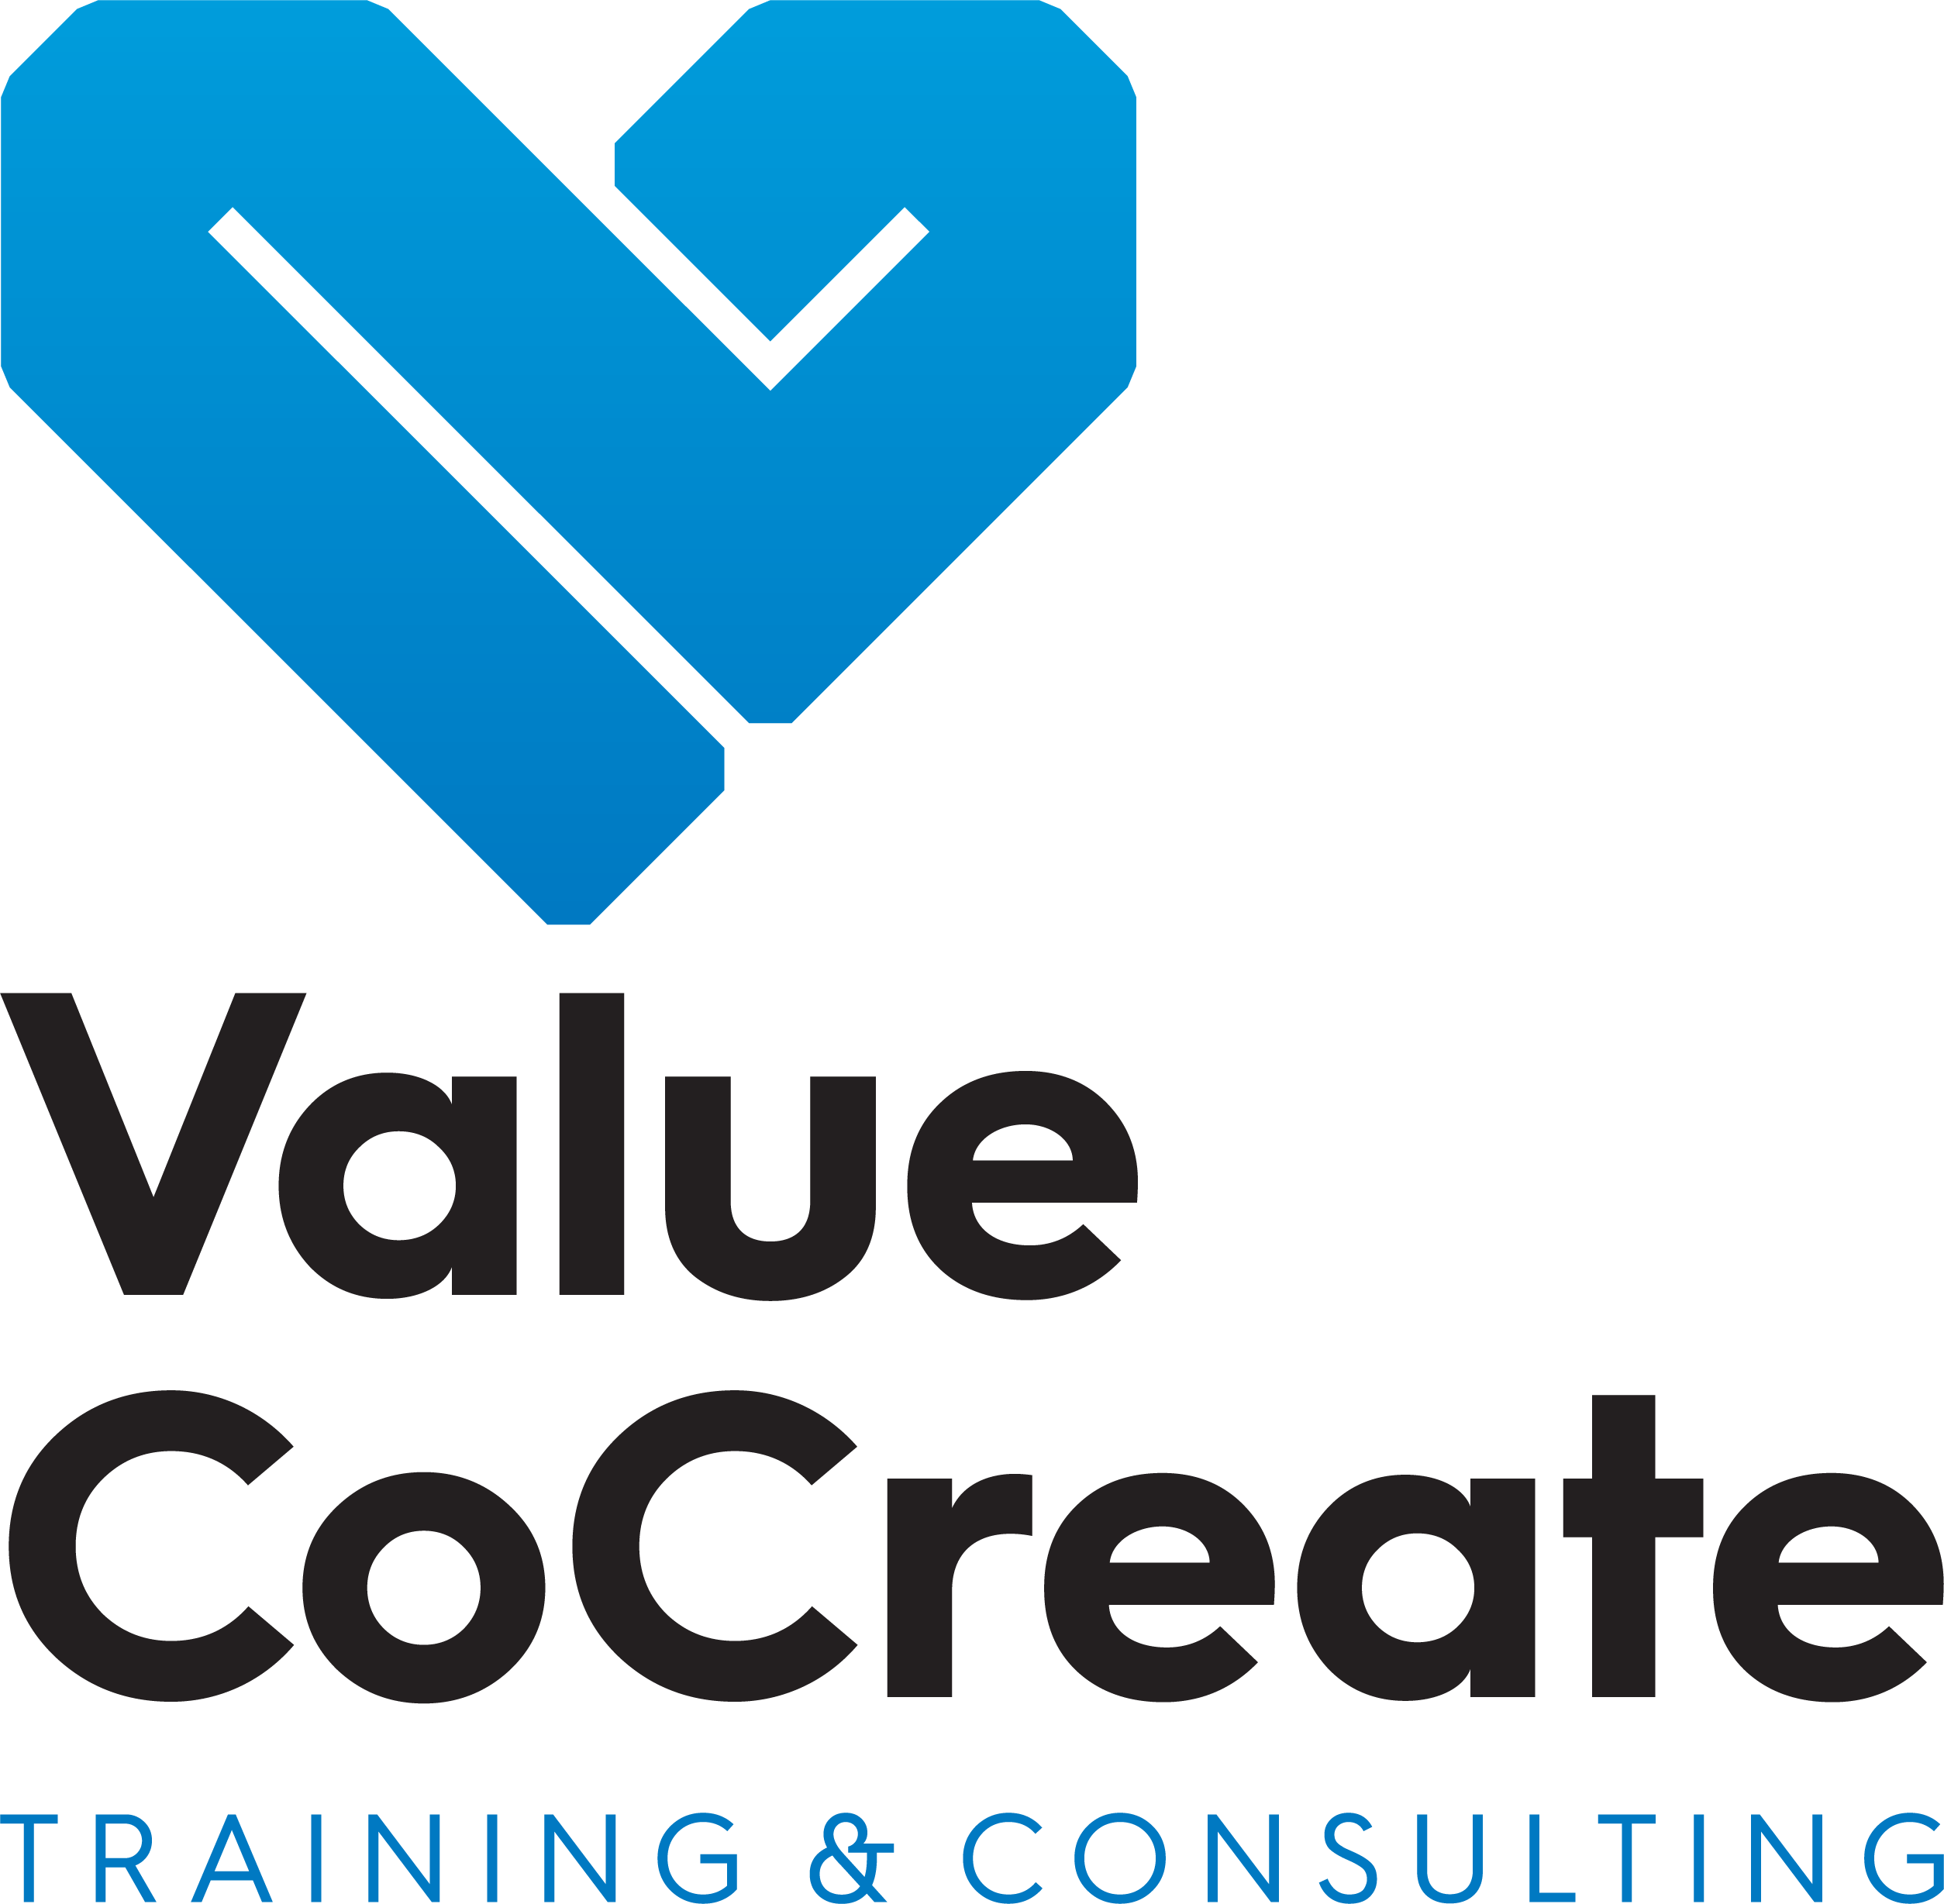 Value Cocreate Limited